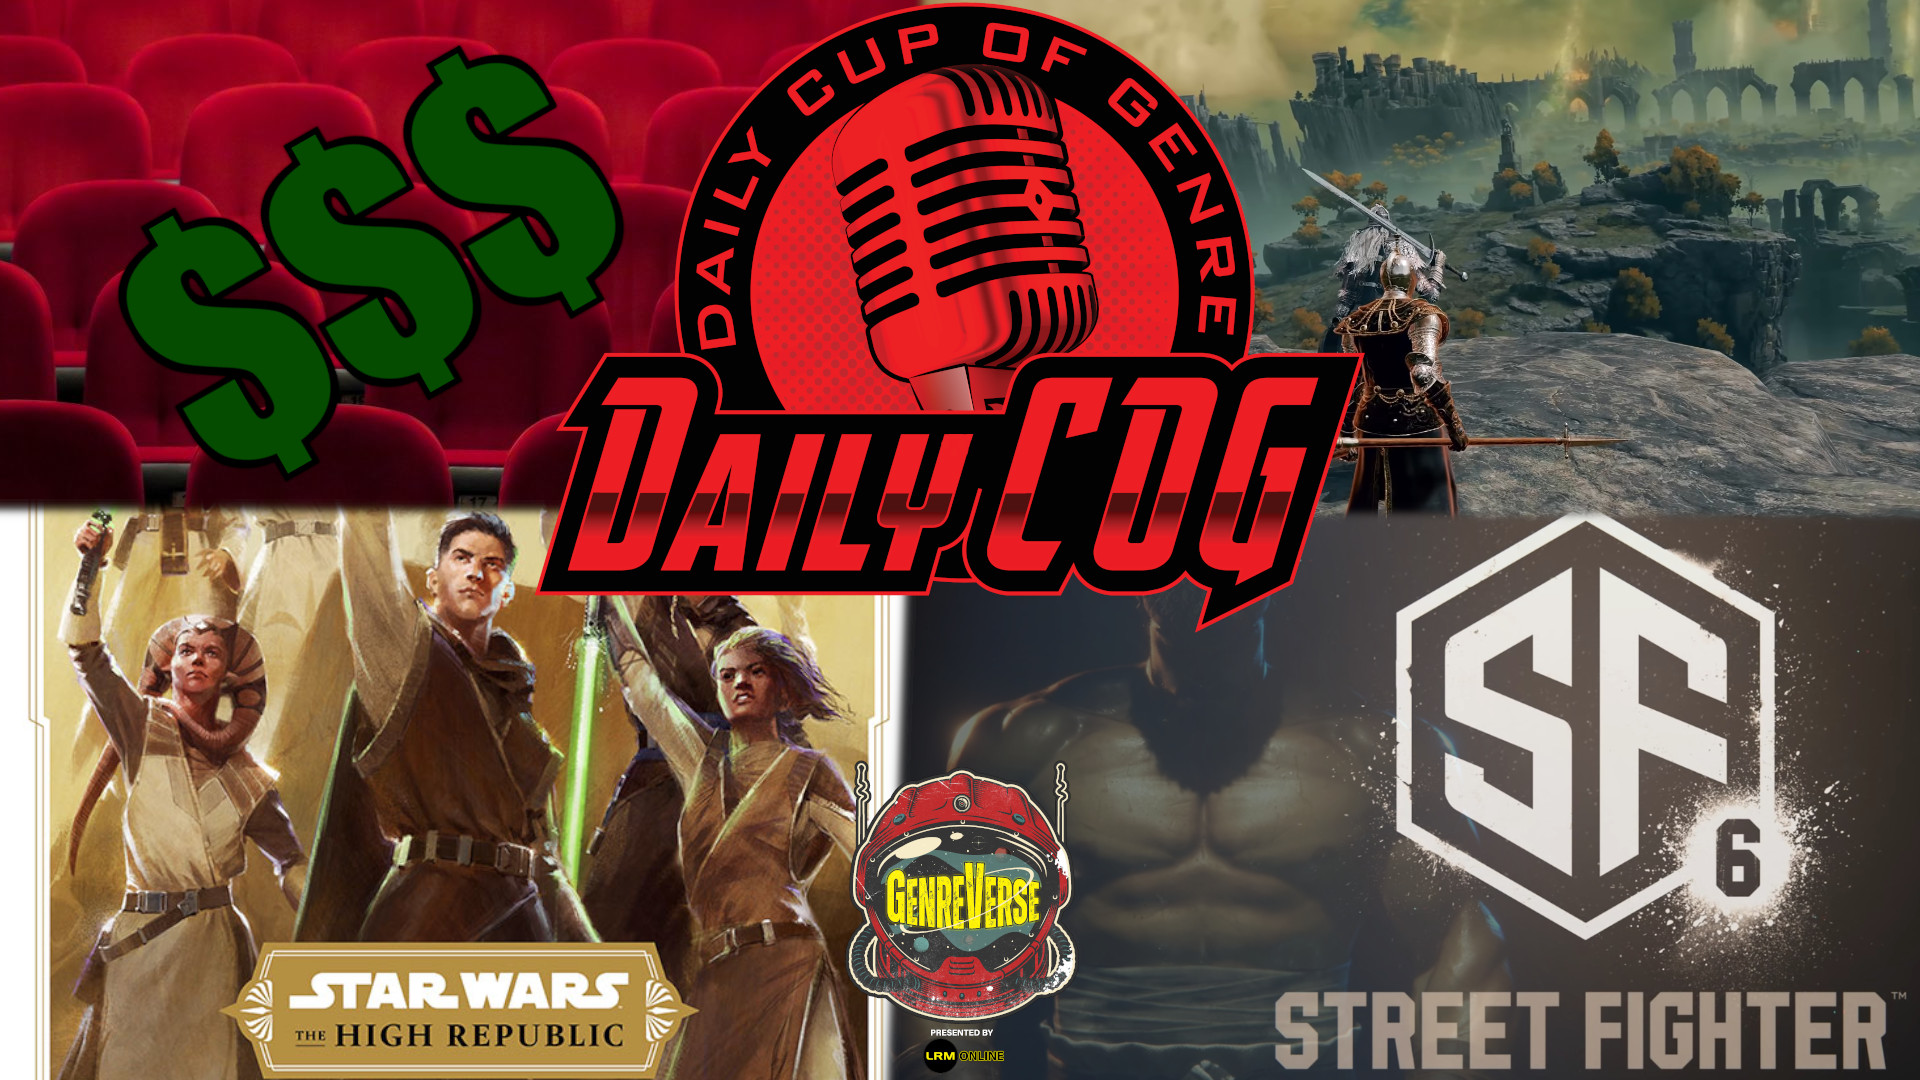 Weekend Box Office Numbers Jon Watts Directing Star Wars High Republic Series, Street Fighter 6 Teaser Reaction, Elden Ring Overview Trailer Reaction Daily COG Video Mixdown